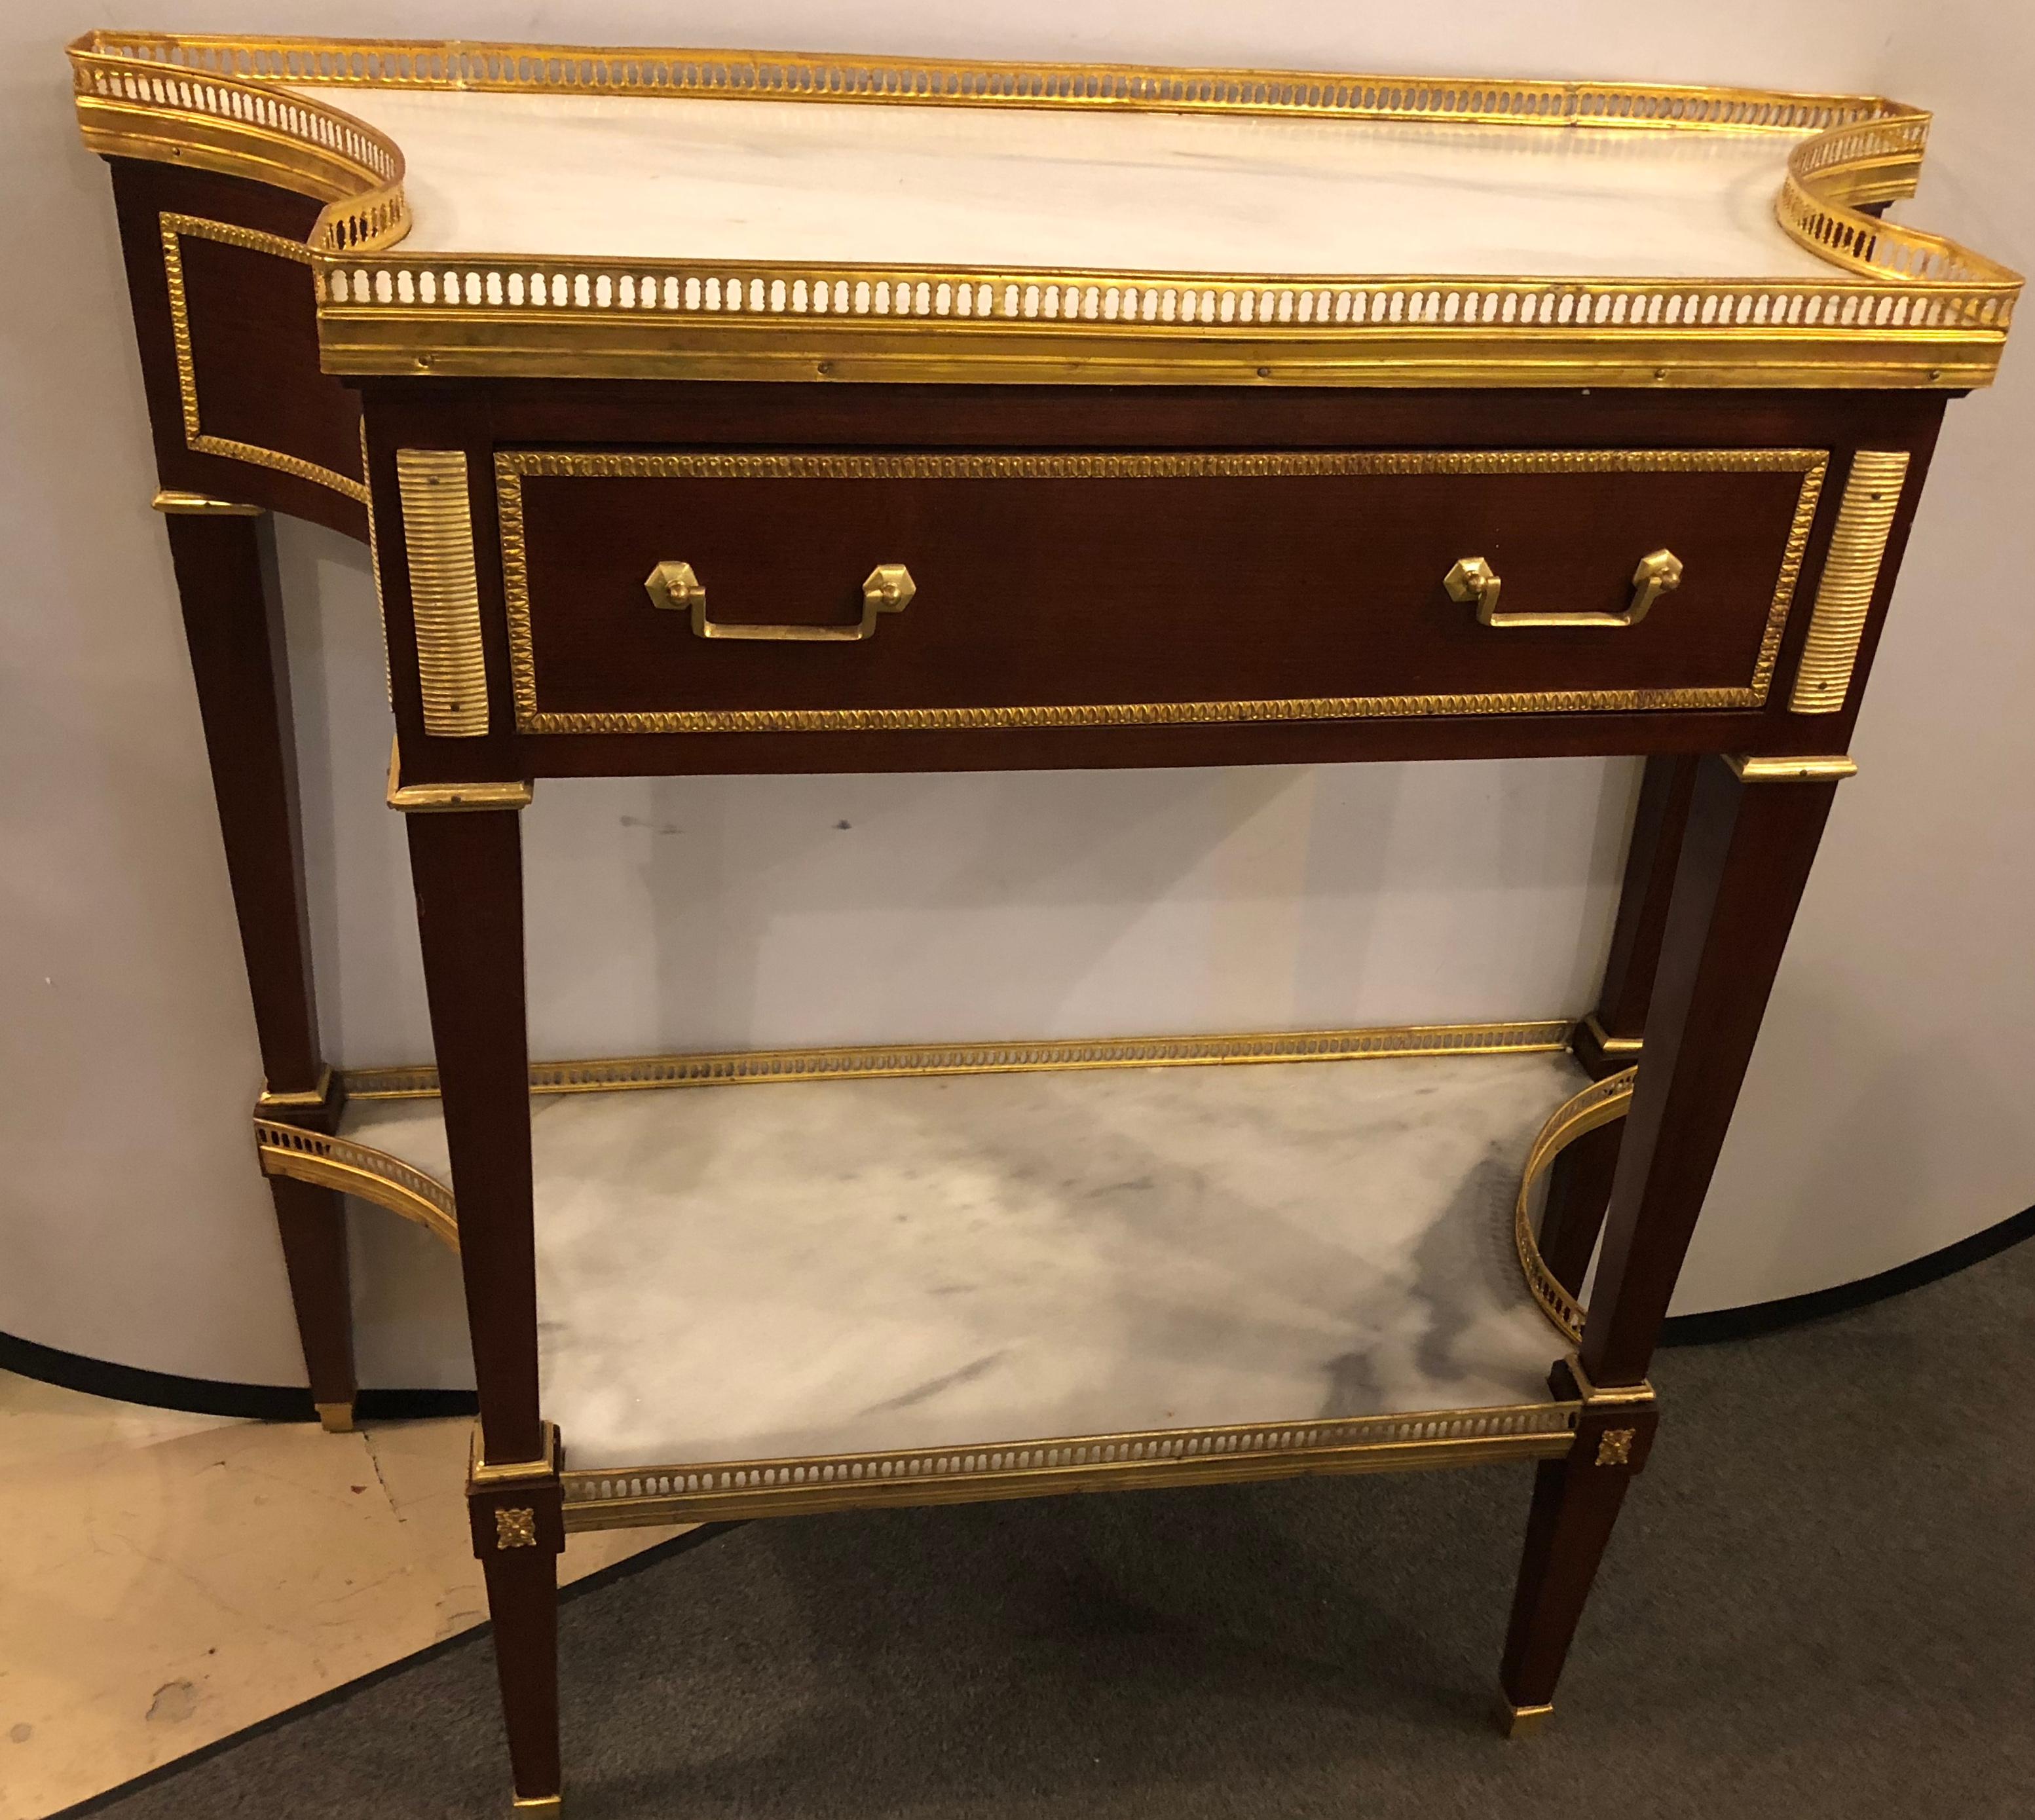 Louis XVI Pair of Russian Neoclassical Style Consoles/Servers or Commodes with Marble Tops